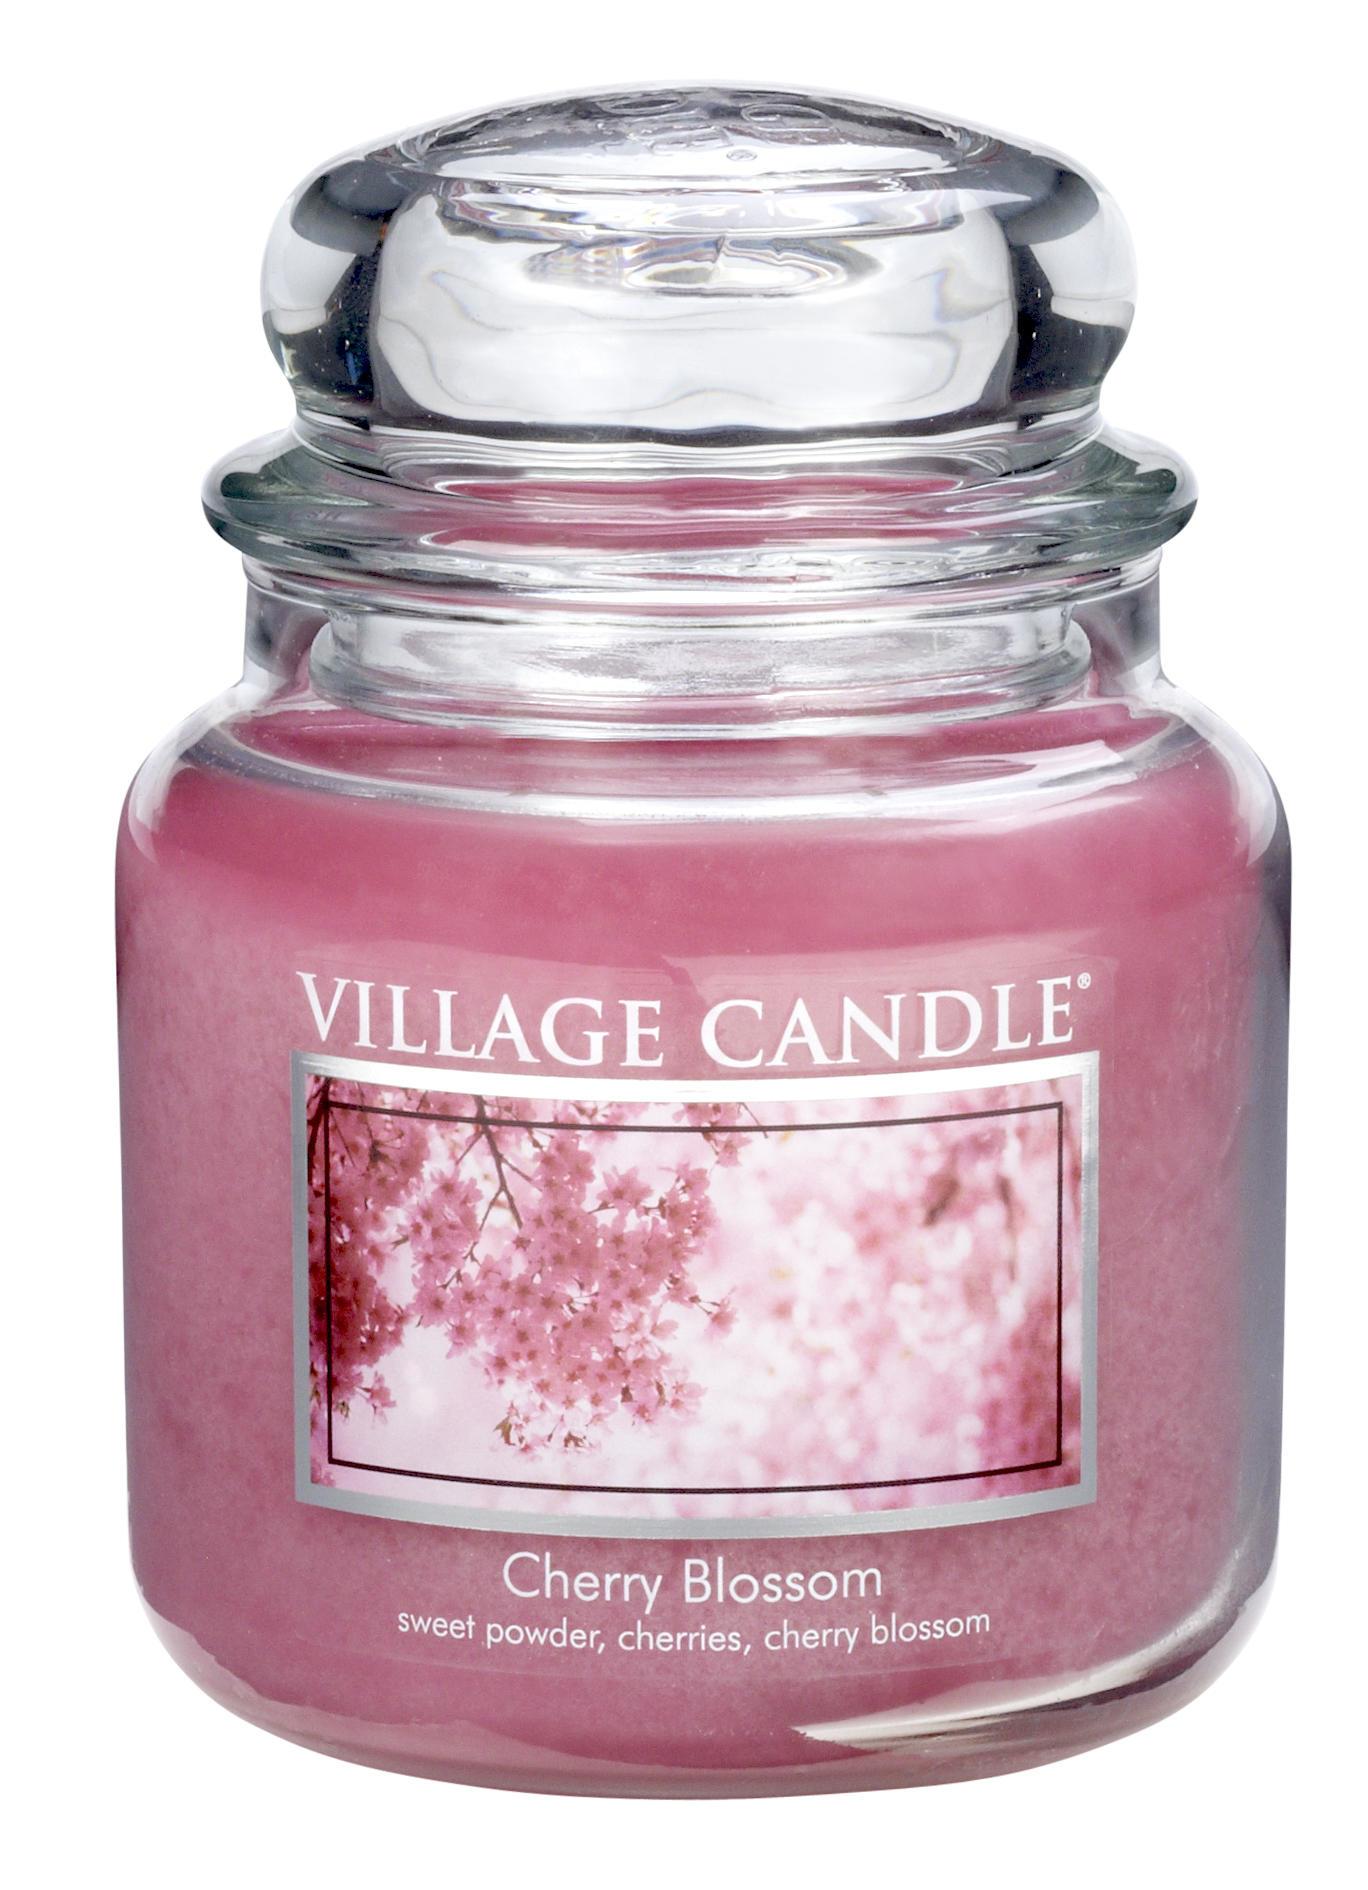 Citrus Blossom Scented Candle. Cherry Candle актриса. Dual Jar. Cherry candle